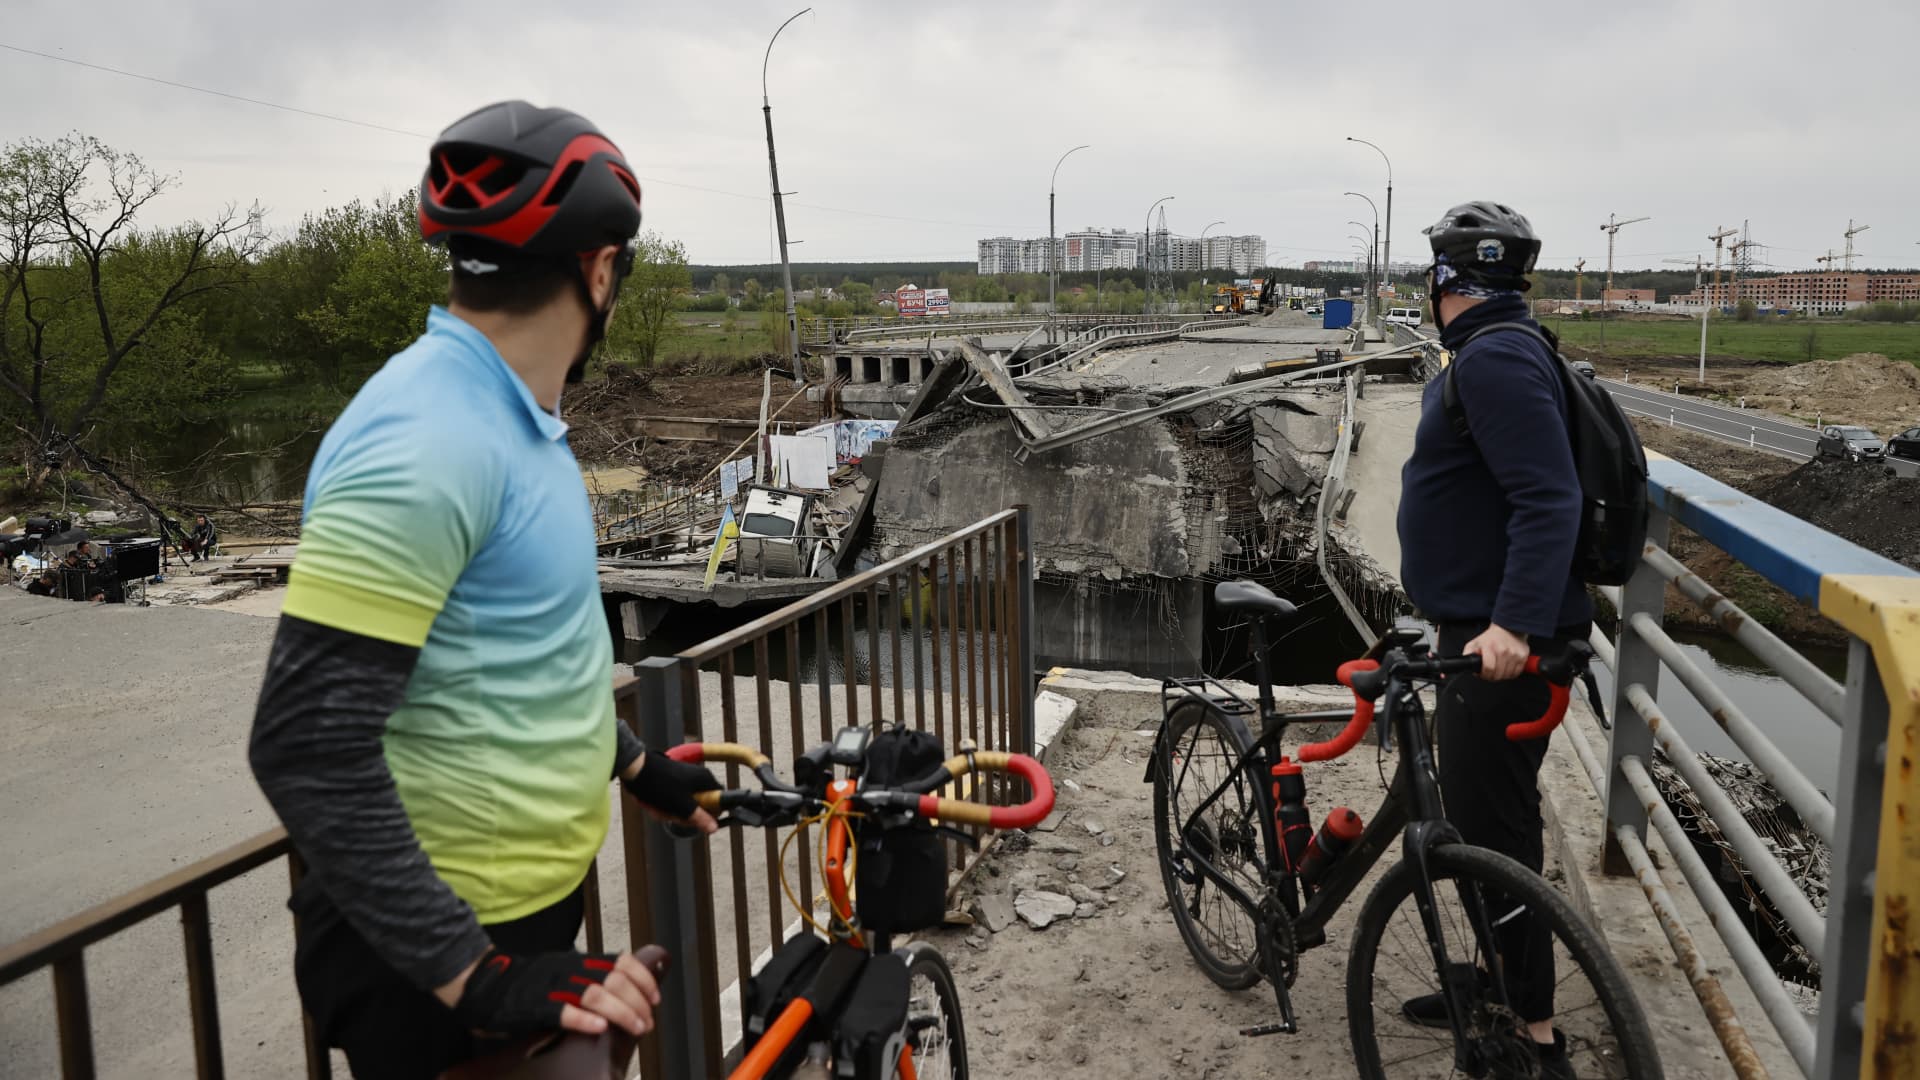 Cyclists view a collapsed bridge ahead of the World Bicycle Day in Irpin in Ukraine's Kyiv Oblast on May 07, 2022 as the Russia-Ukraine war continues. 